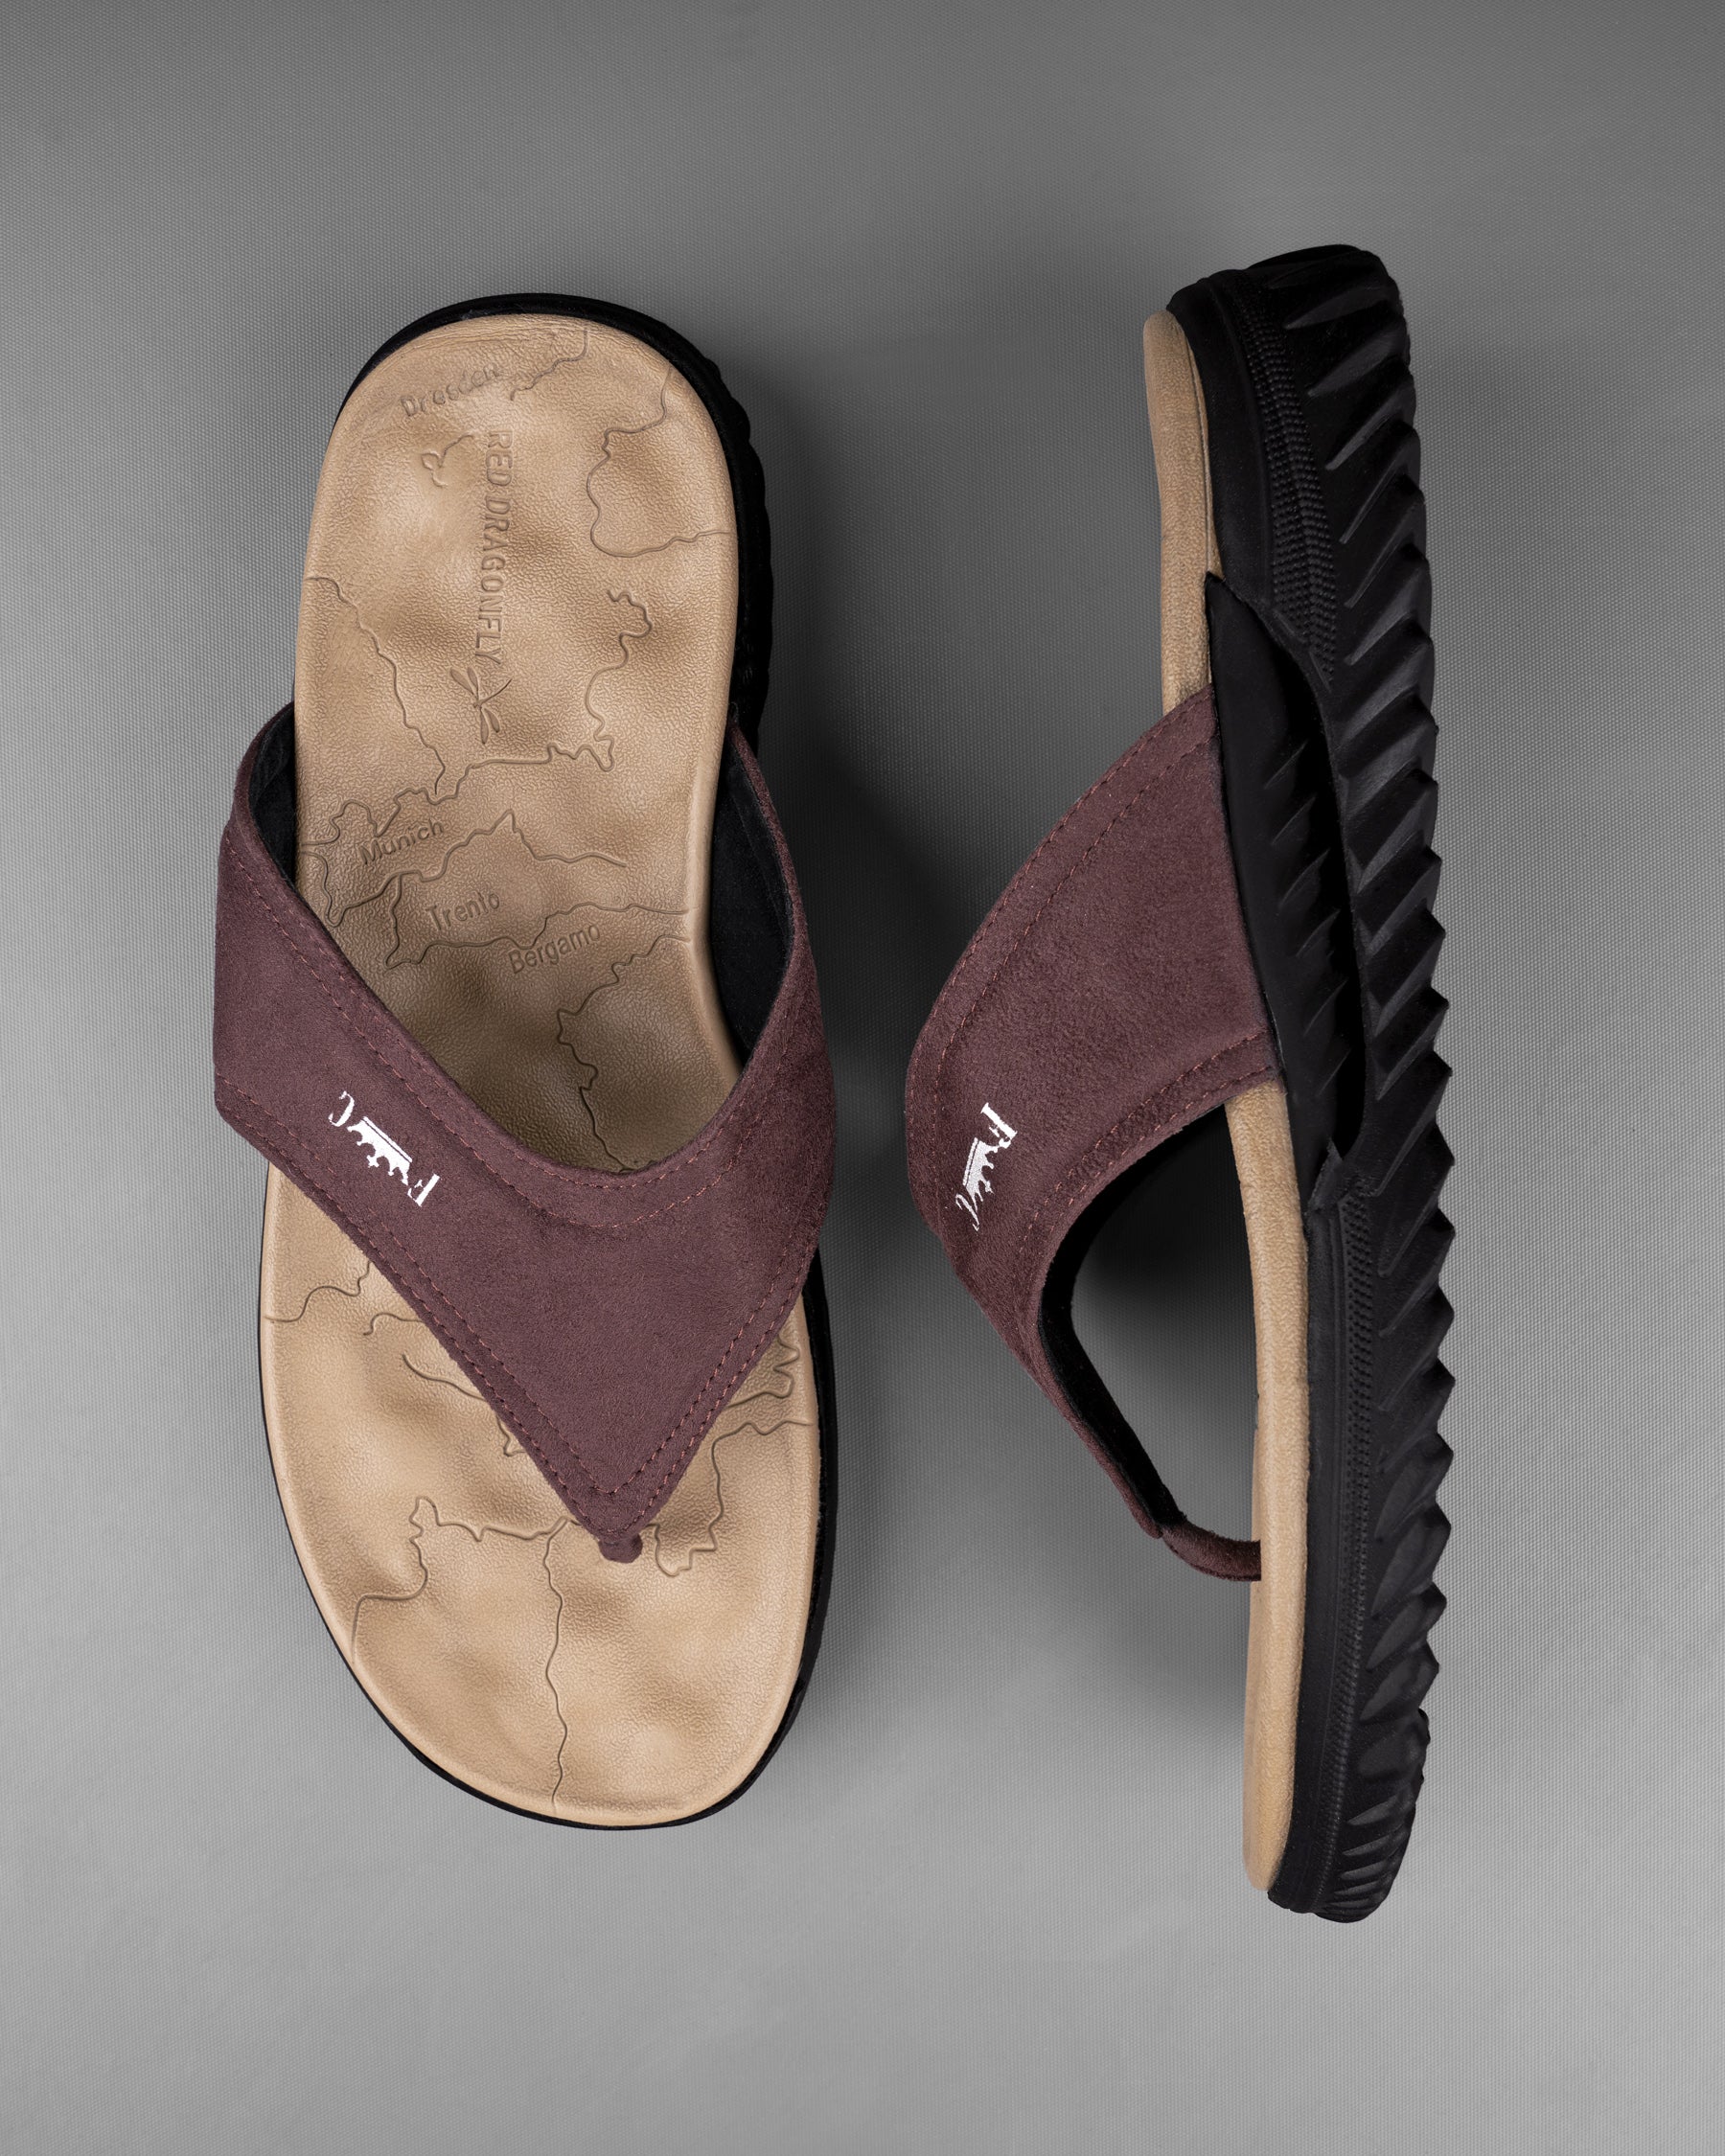 Burgundy with peanut and black Map Patterned Suede top comfortable Flip flops FT051-6, FT051-7, FT051-8, FT051-9, FT051-10